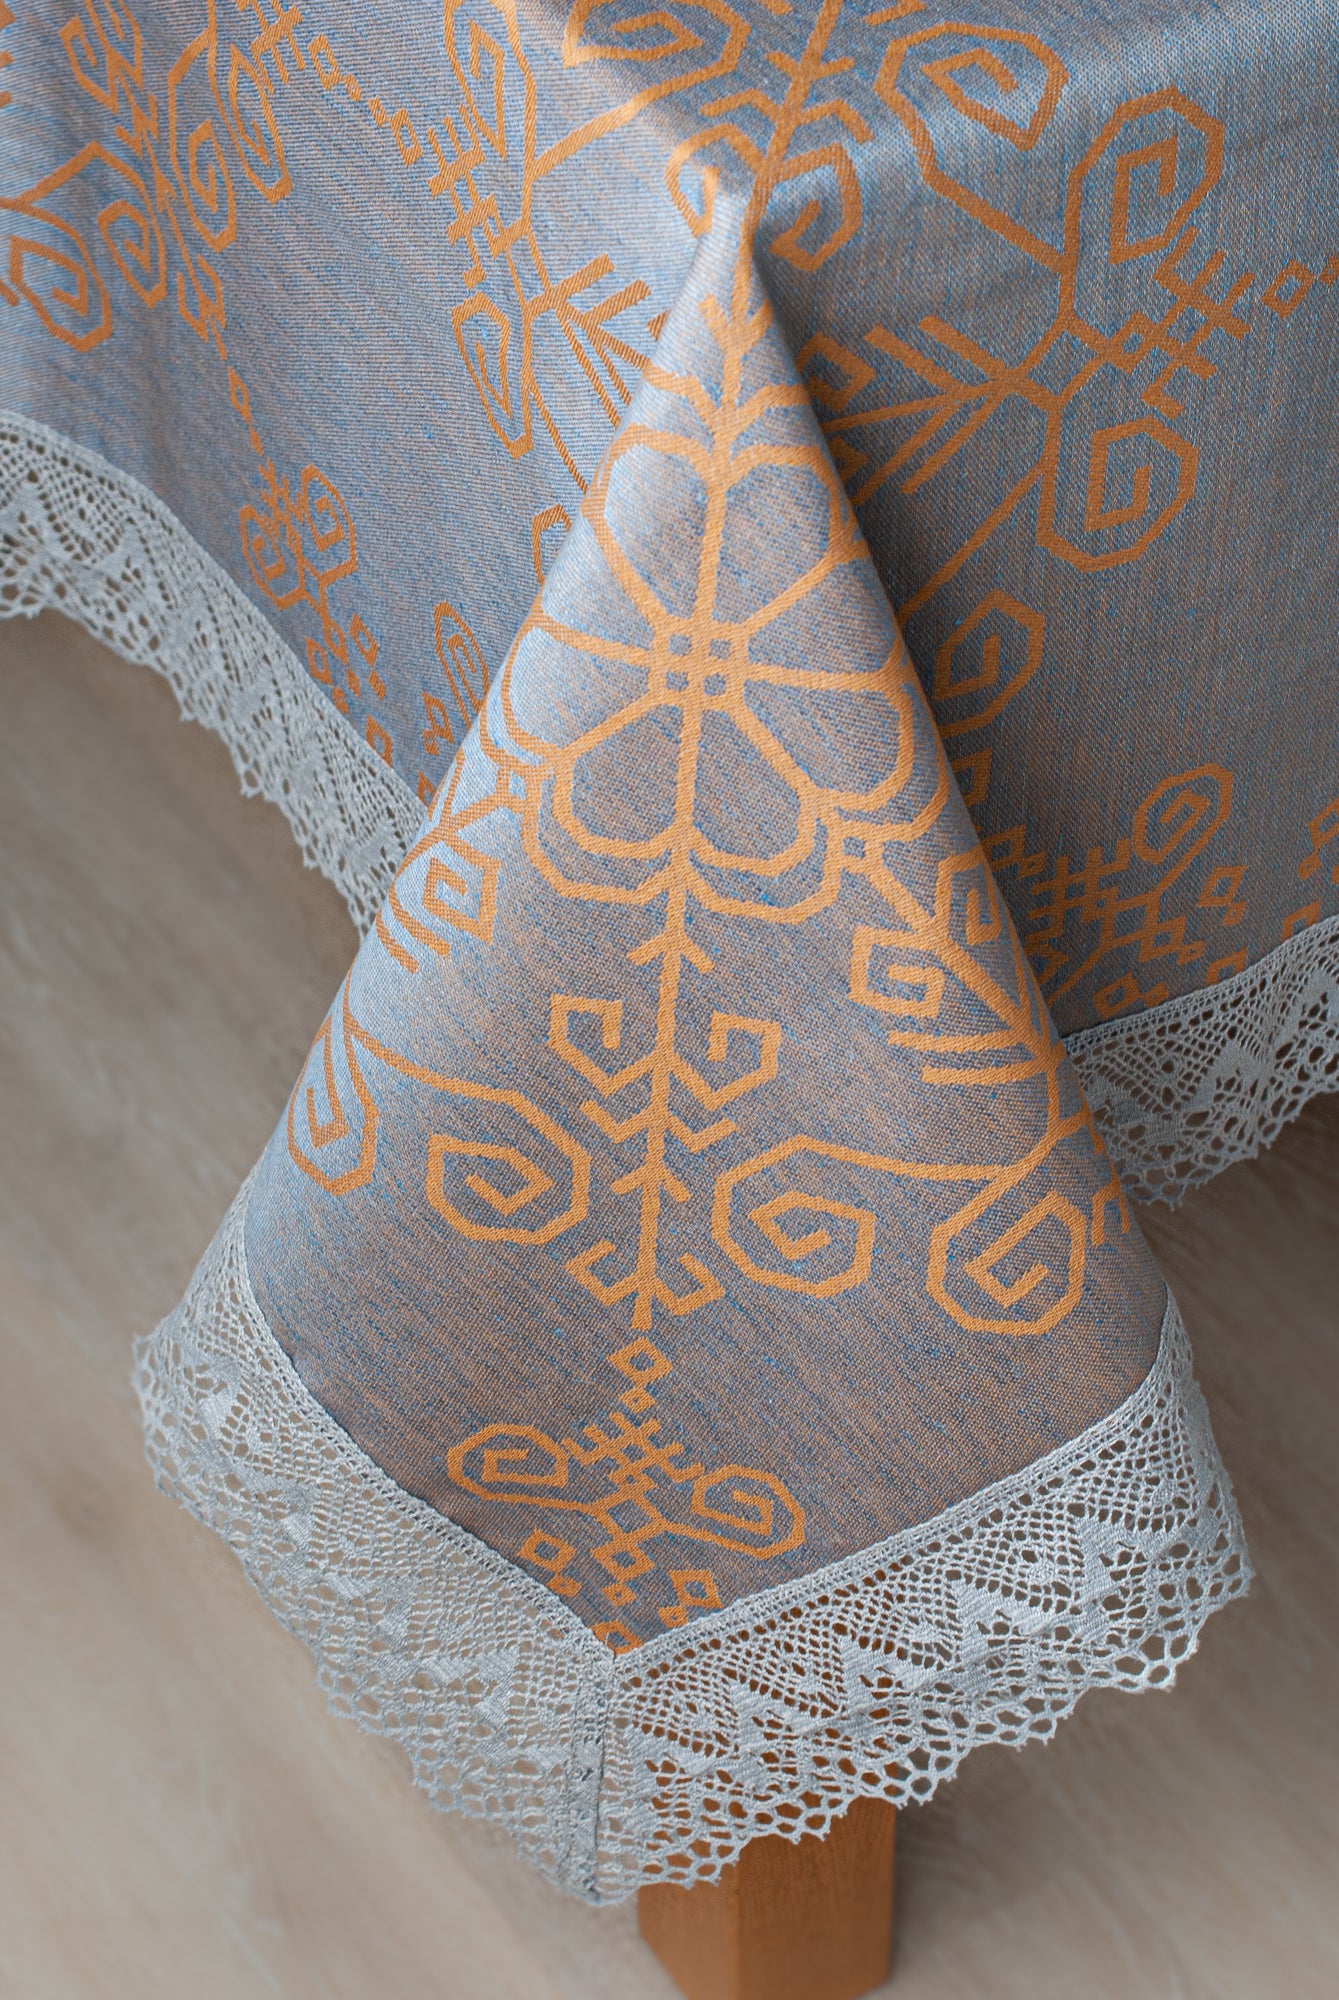 Grey/sand Linen Tablecloth with Lace